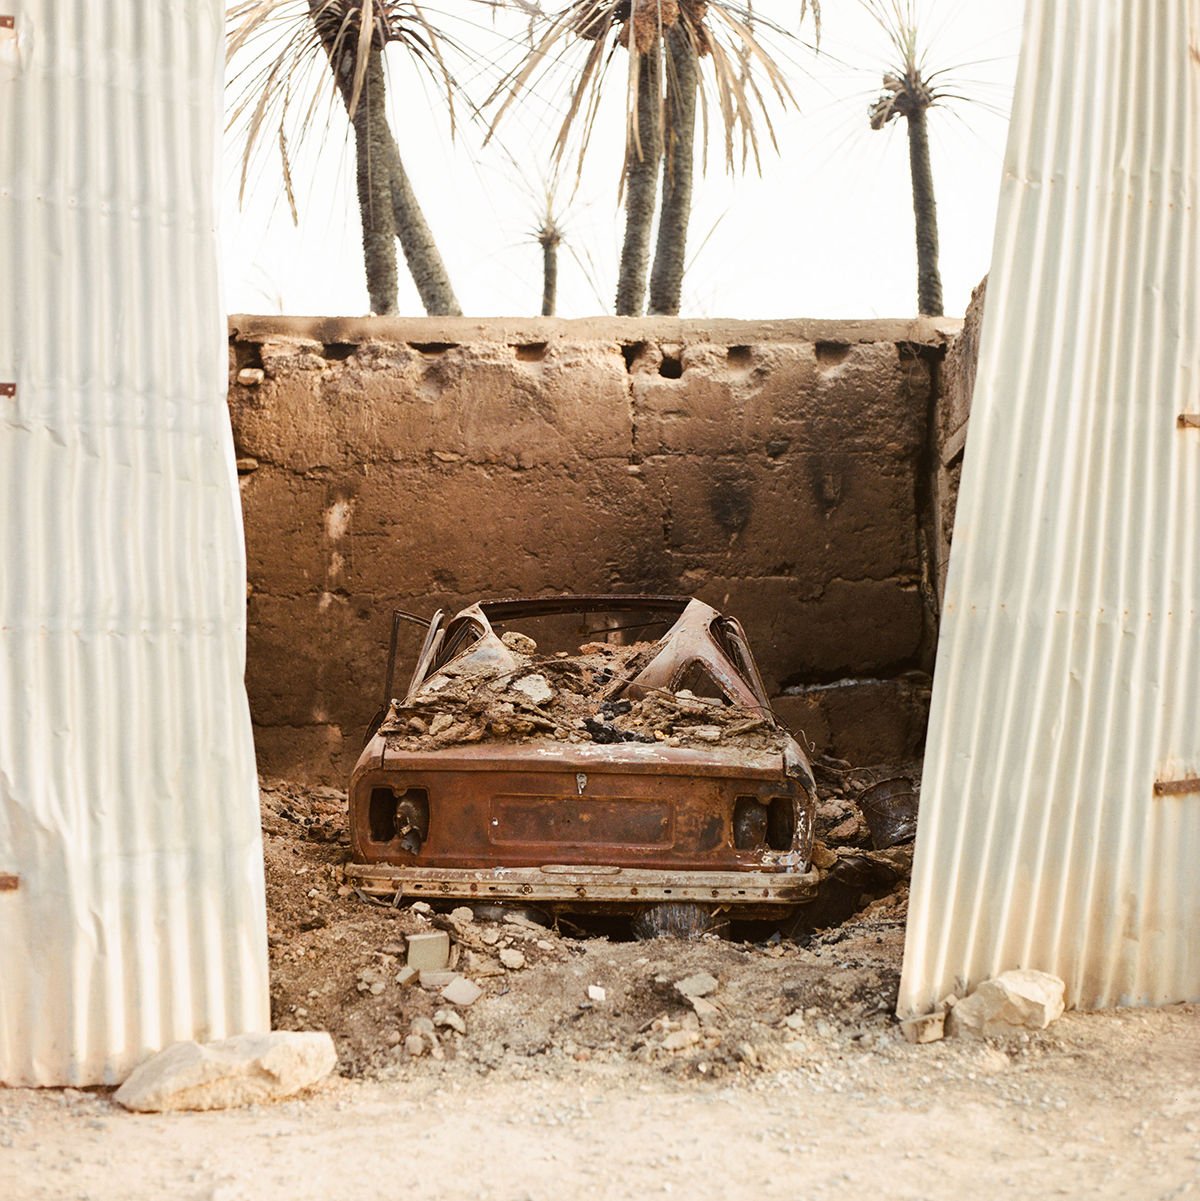 A burned and deserted car in the sand by a wall